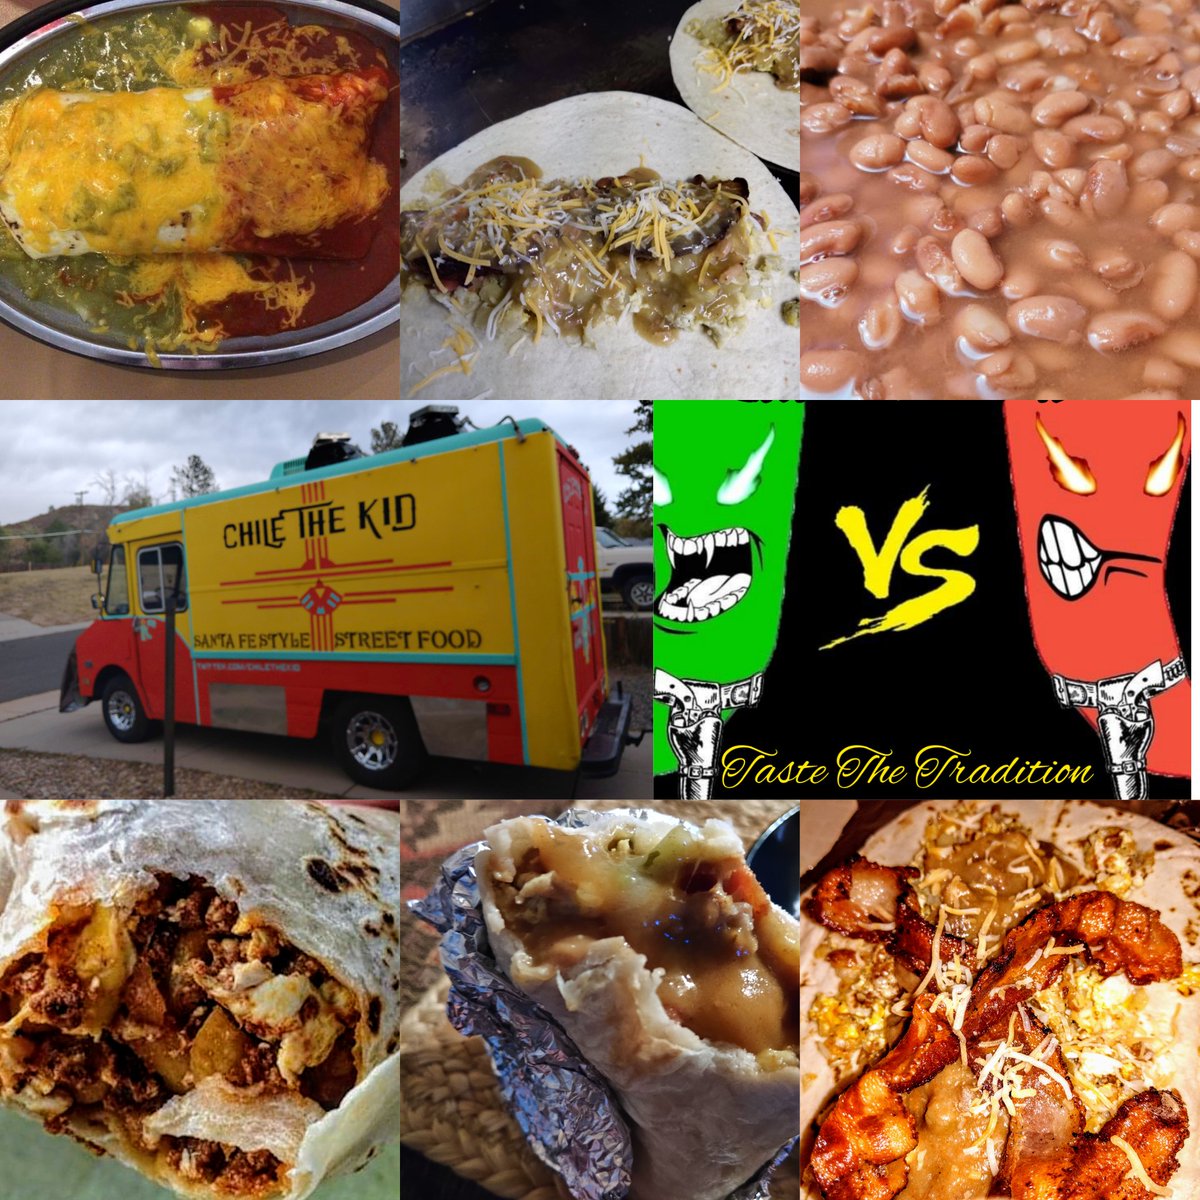 Join us, Chile The Kid.
Saturday for breakfast.
9:10 am
Allen Way and East Allen
Founders parkway.

#coloradofood #authentic #cuisine #hatchgreenchile#castlerockcolorado #denvercolorado
#castlerockfoodtrucks #breakfastburritos